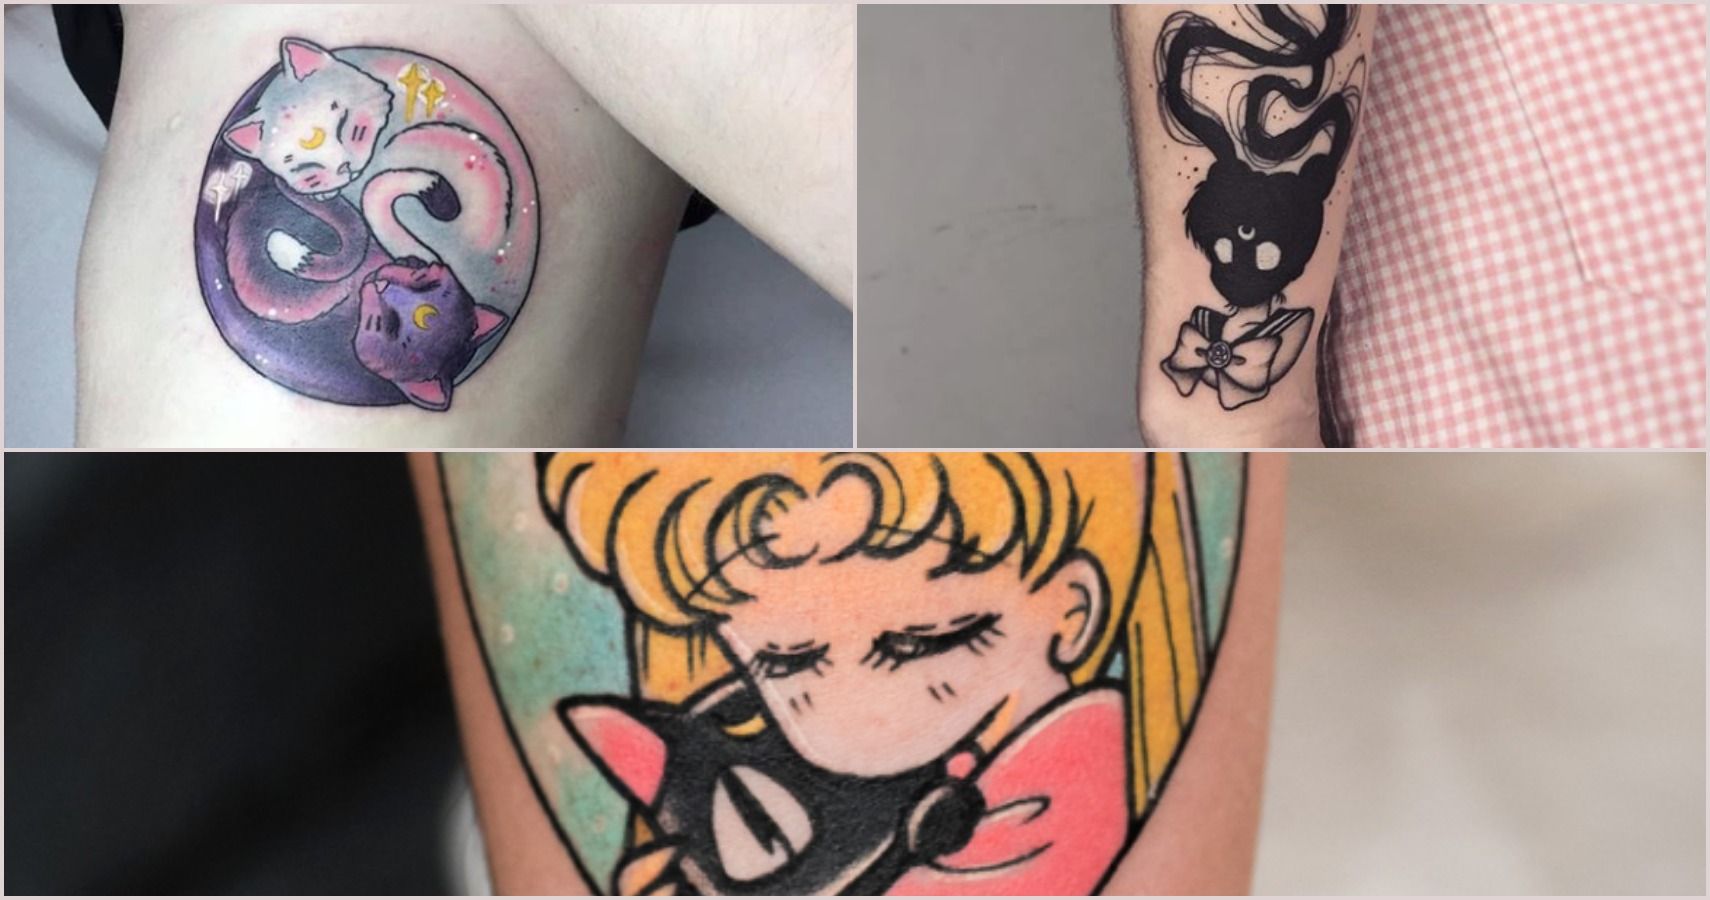 Sailor moon and chibby moon transformations for the lovely Alyssa Thanks  so much babe this was super fun tattoo tat  Sailor moon tattoo Tattoos  Sailor moon